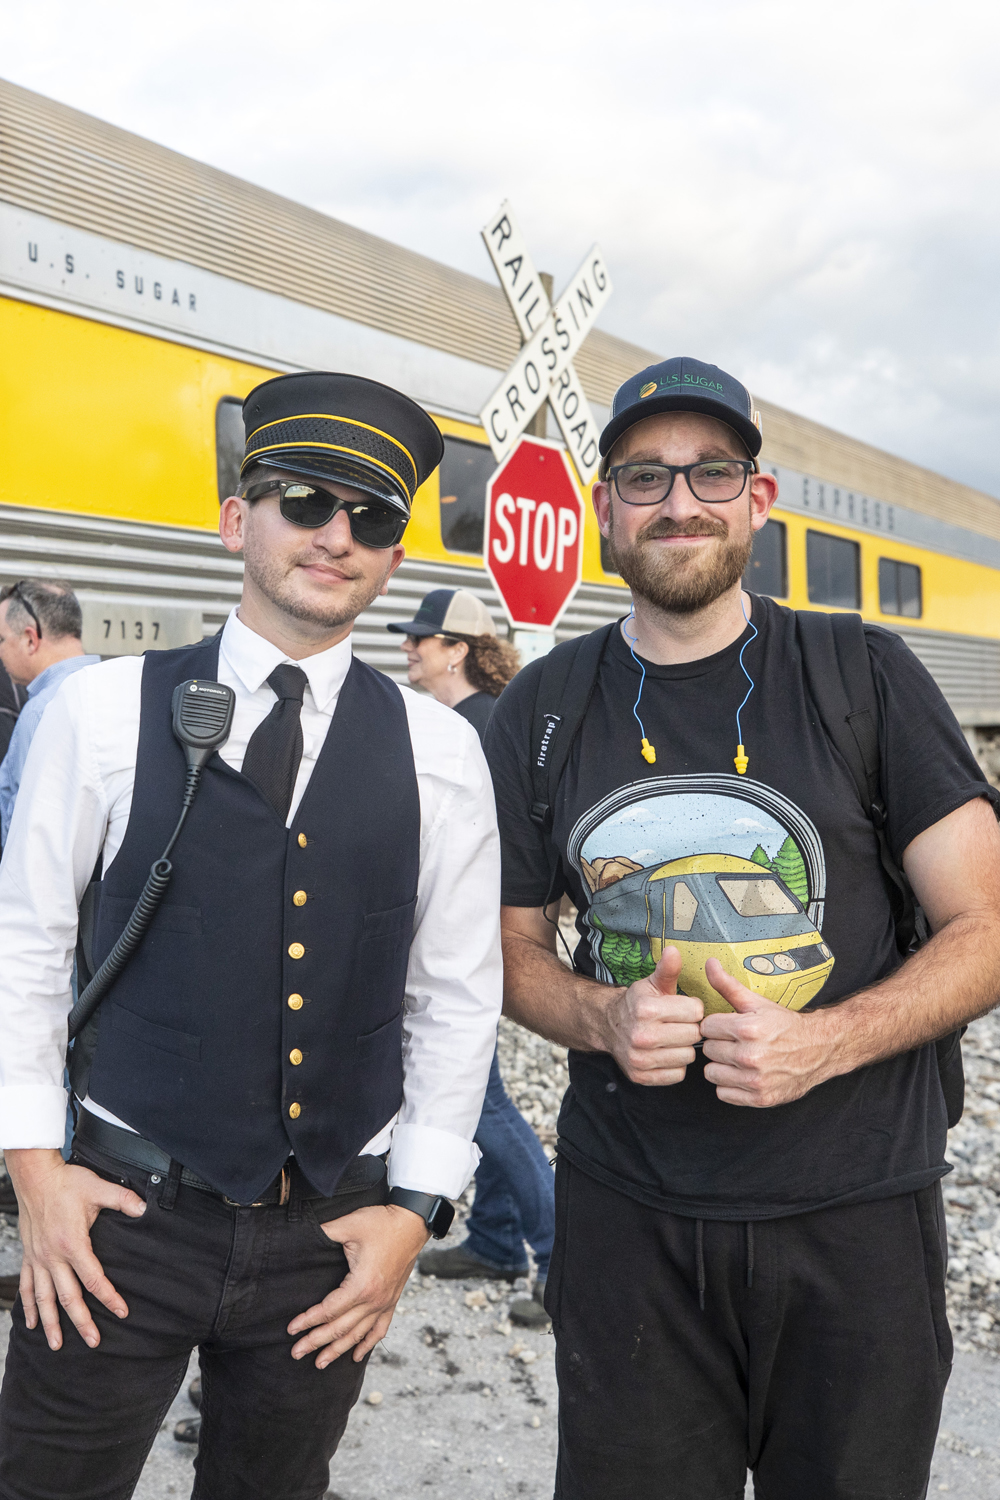 man dressed as conductor standing with another man